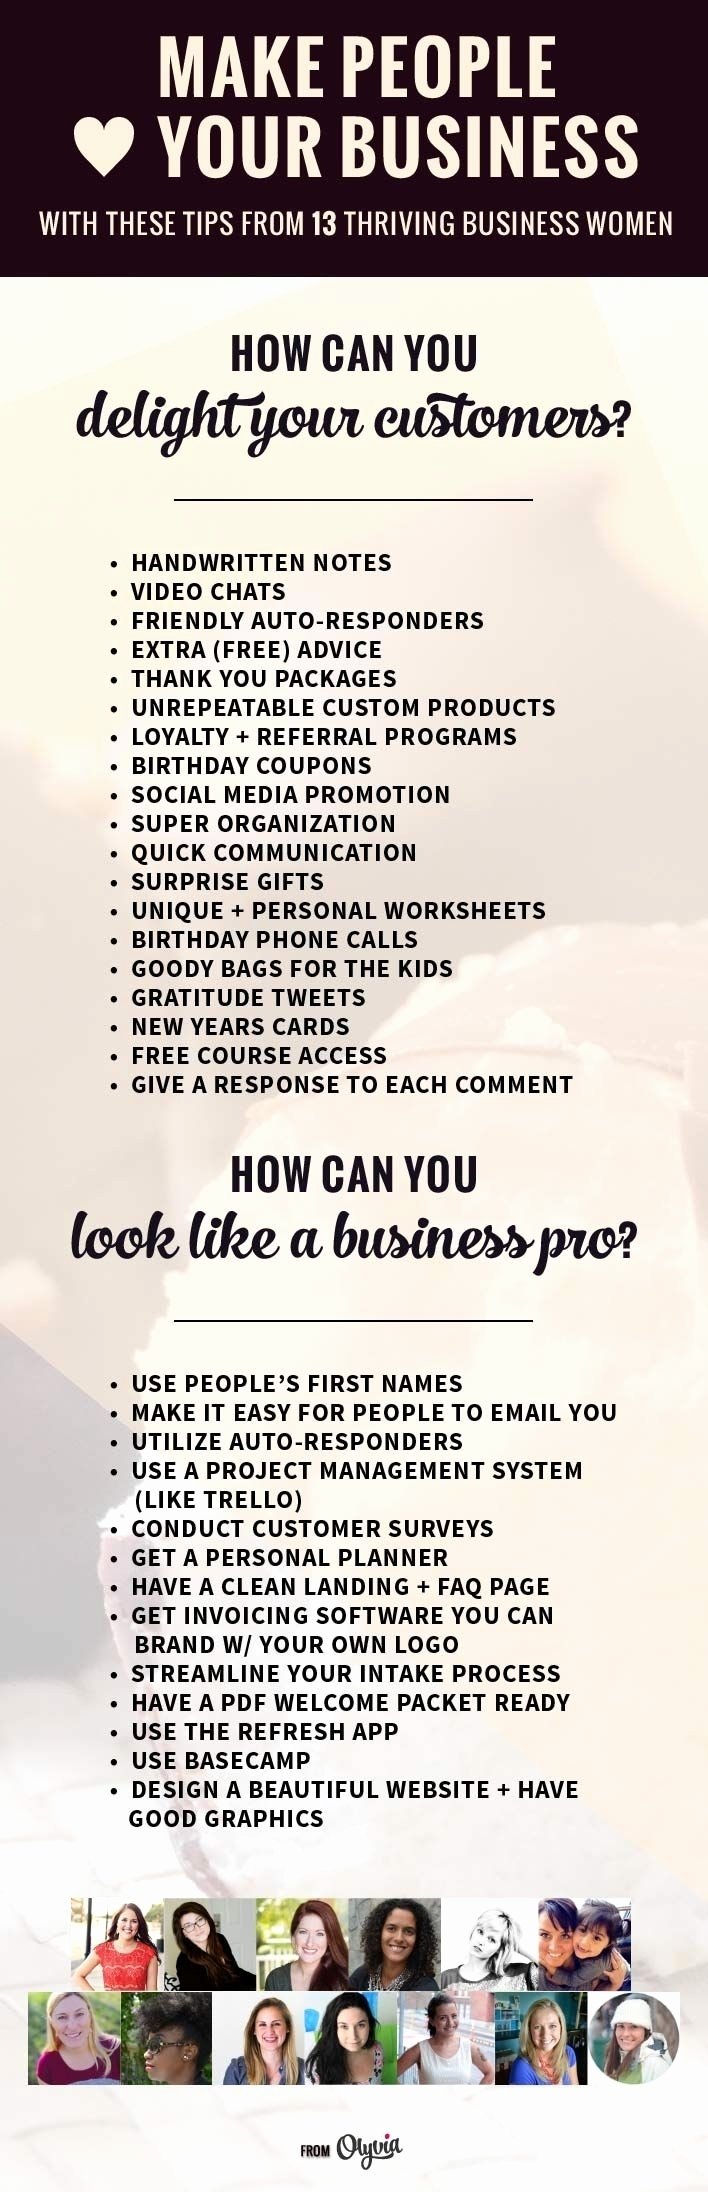 10 Great Ideas For Your Own Business best 25 own business ideas ideas on pinterest start a business 2022